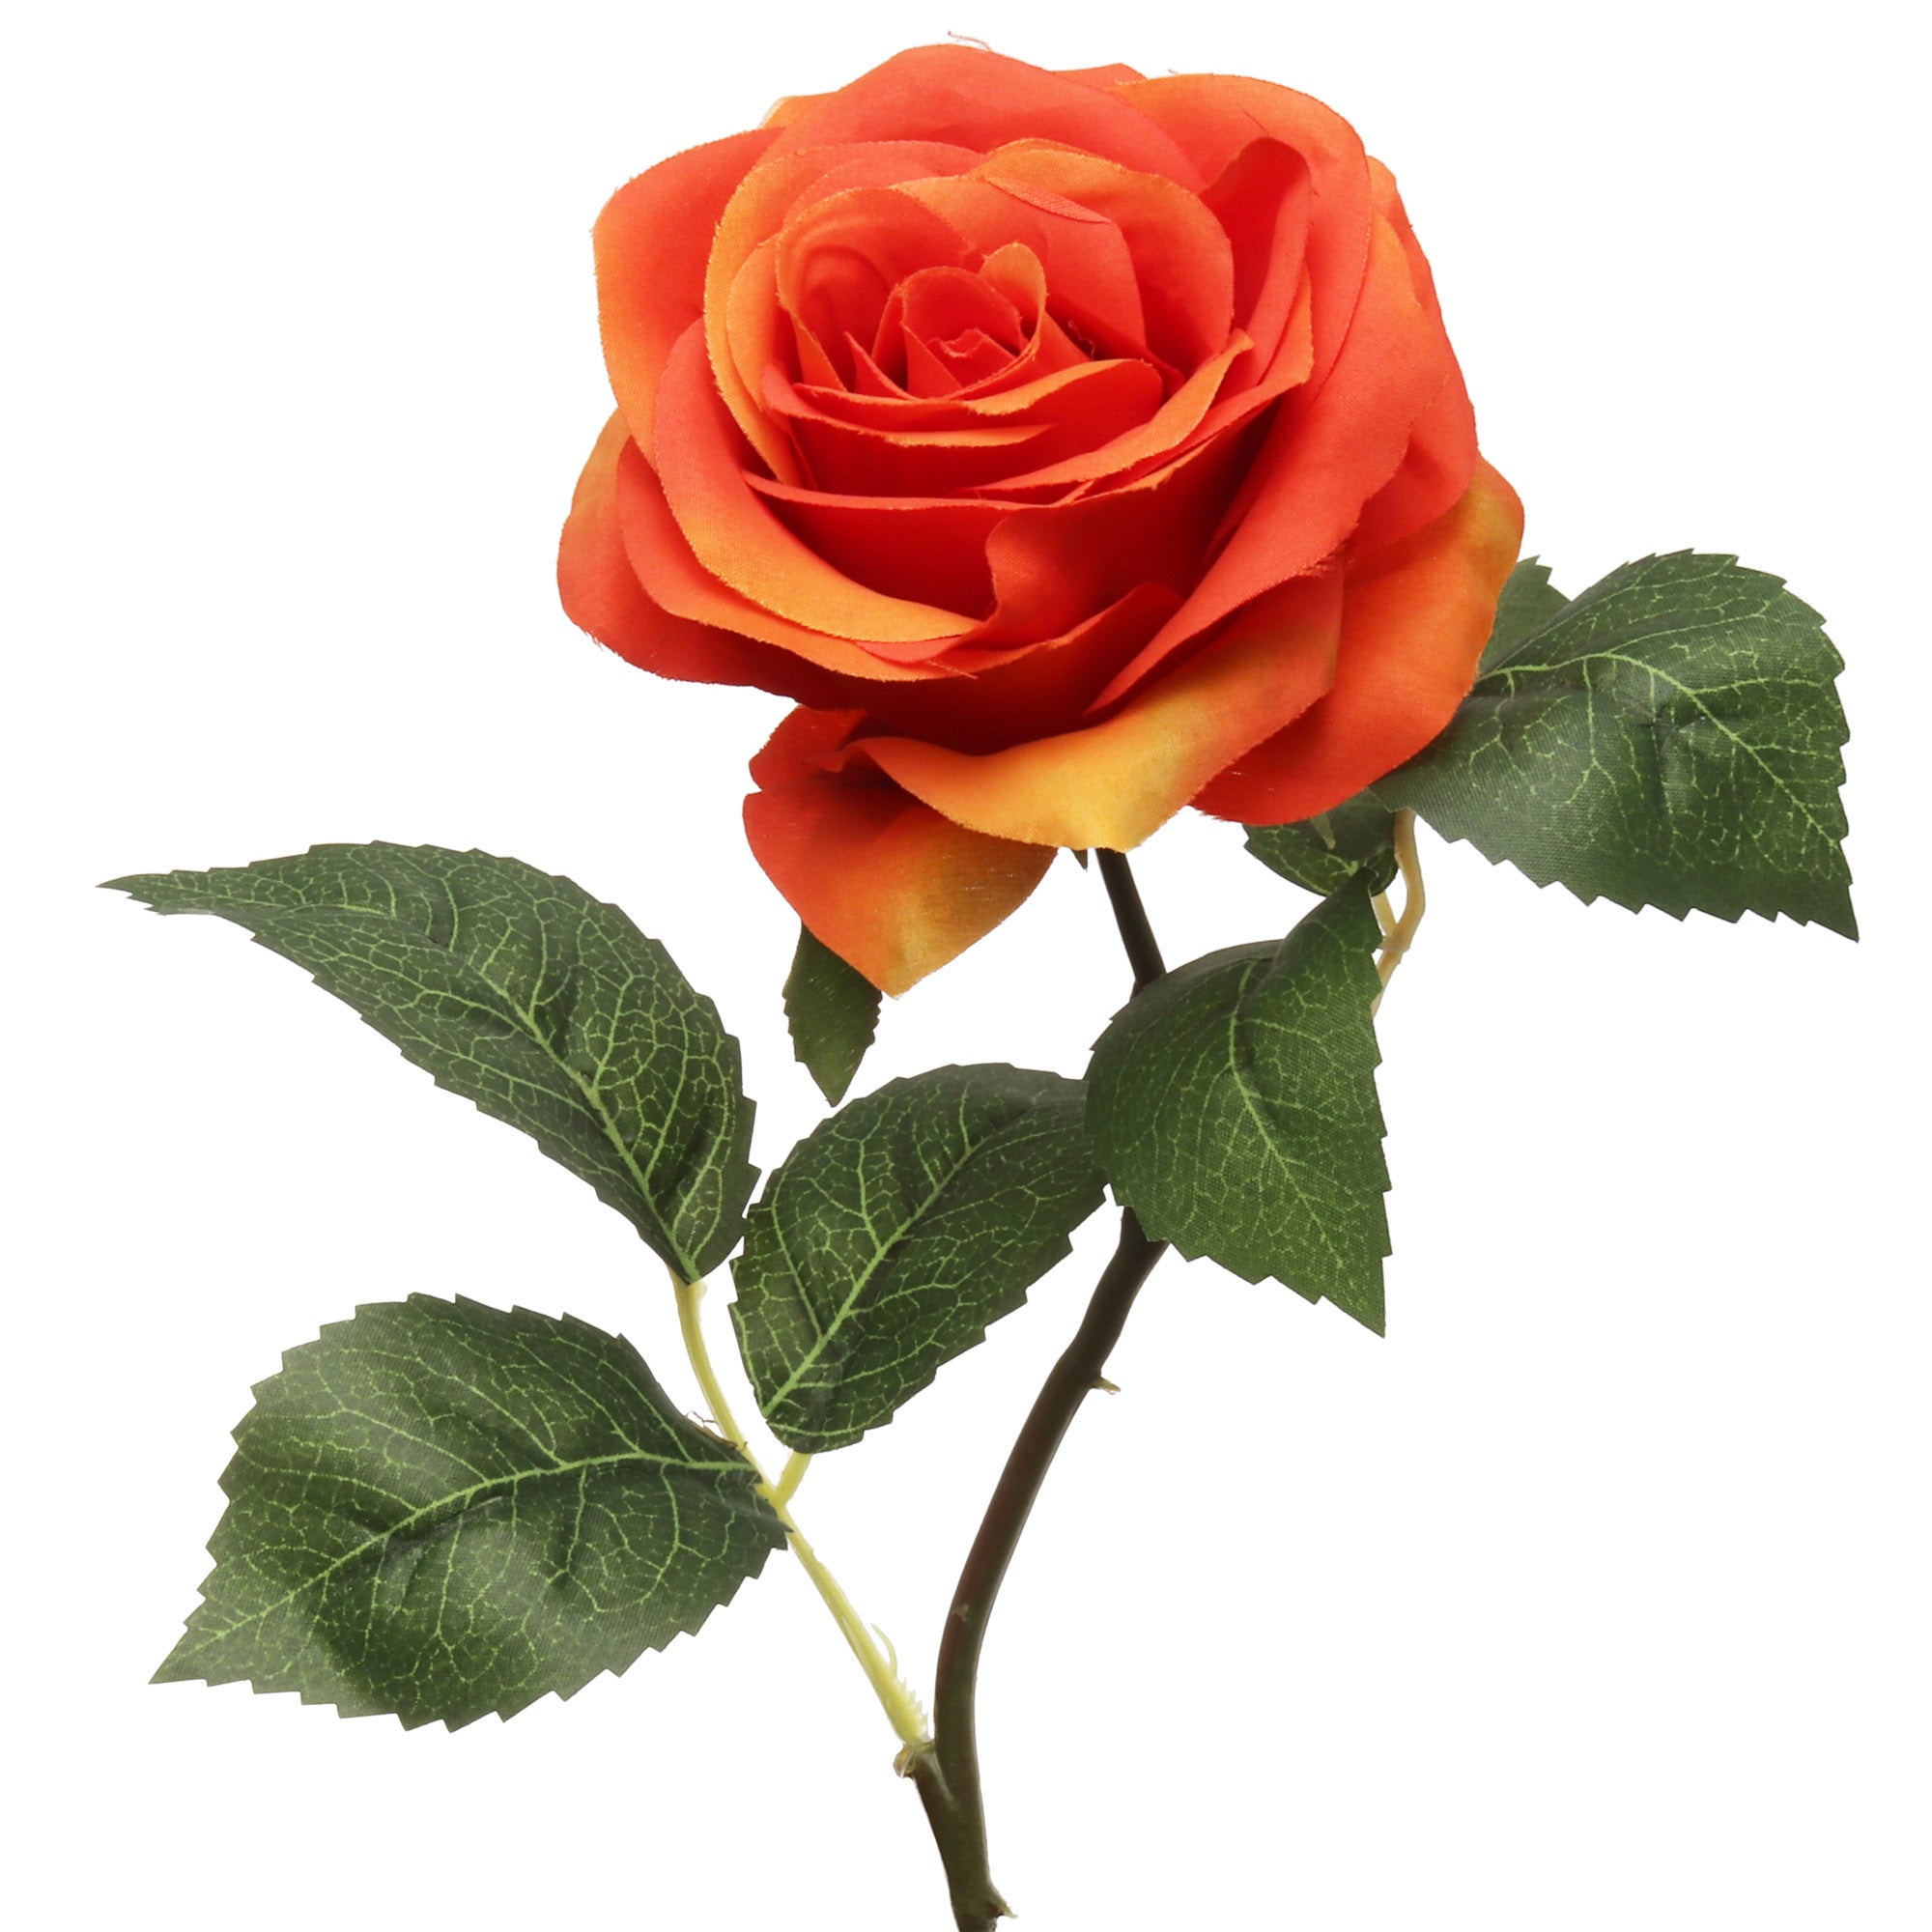 Radiant 20-inch Orange Open Rose with 4" Diameter - Perfect for Weddings, Home Decor, and Special Events